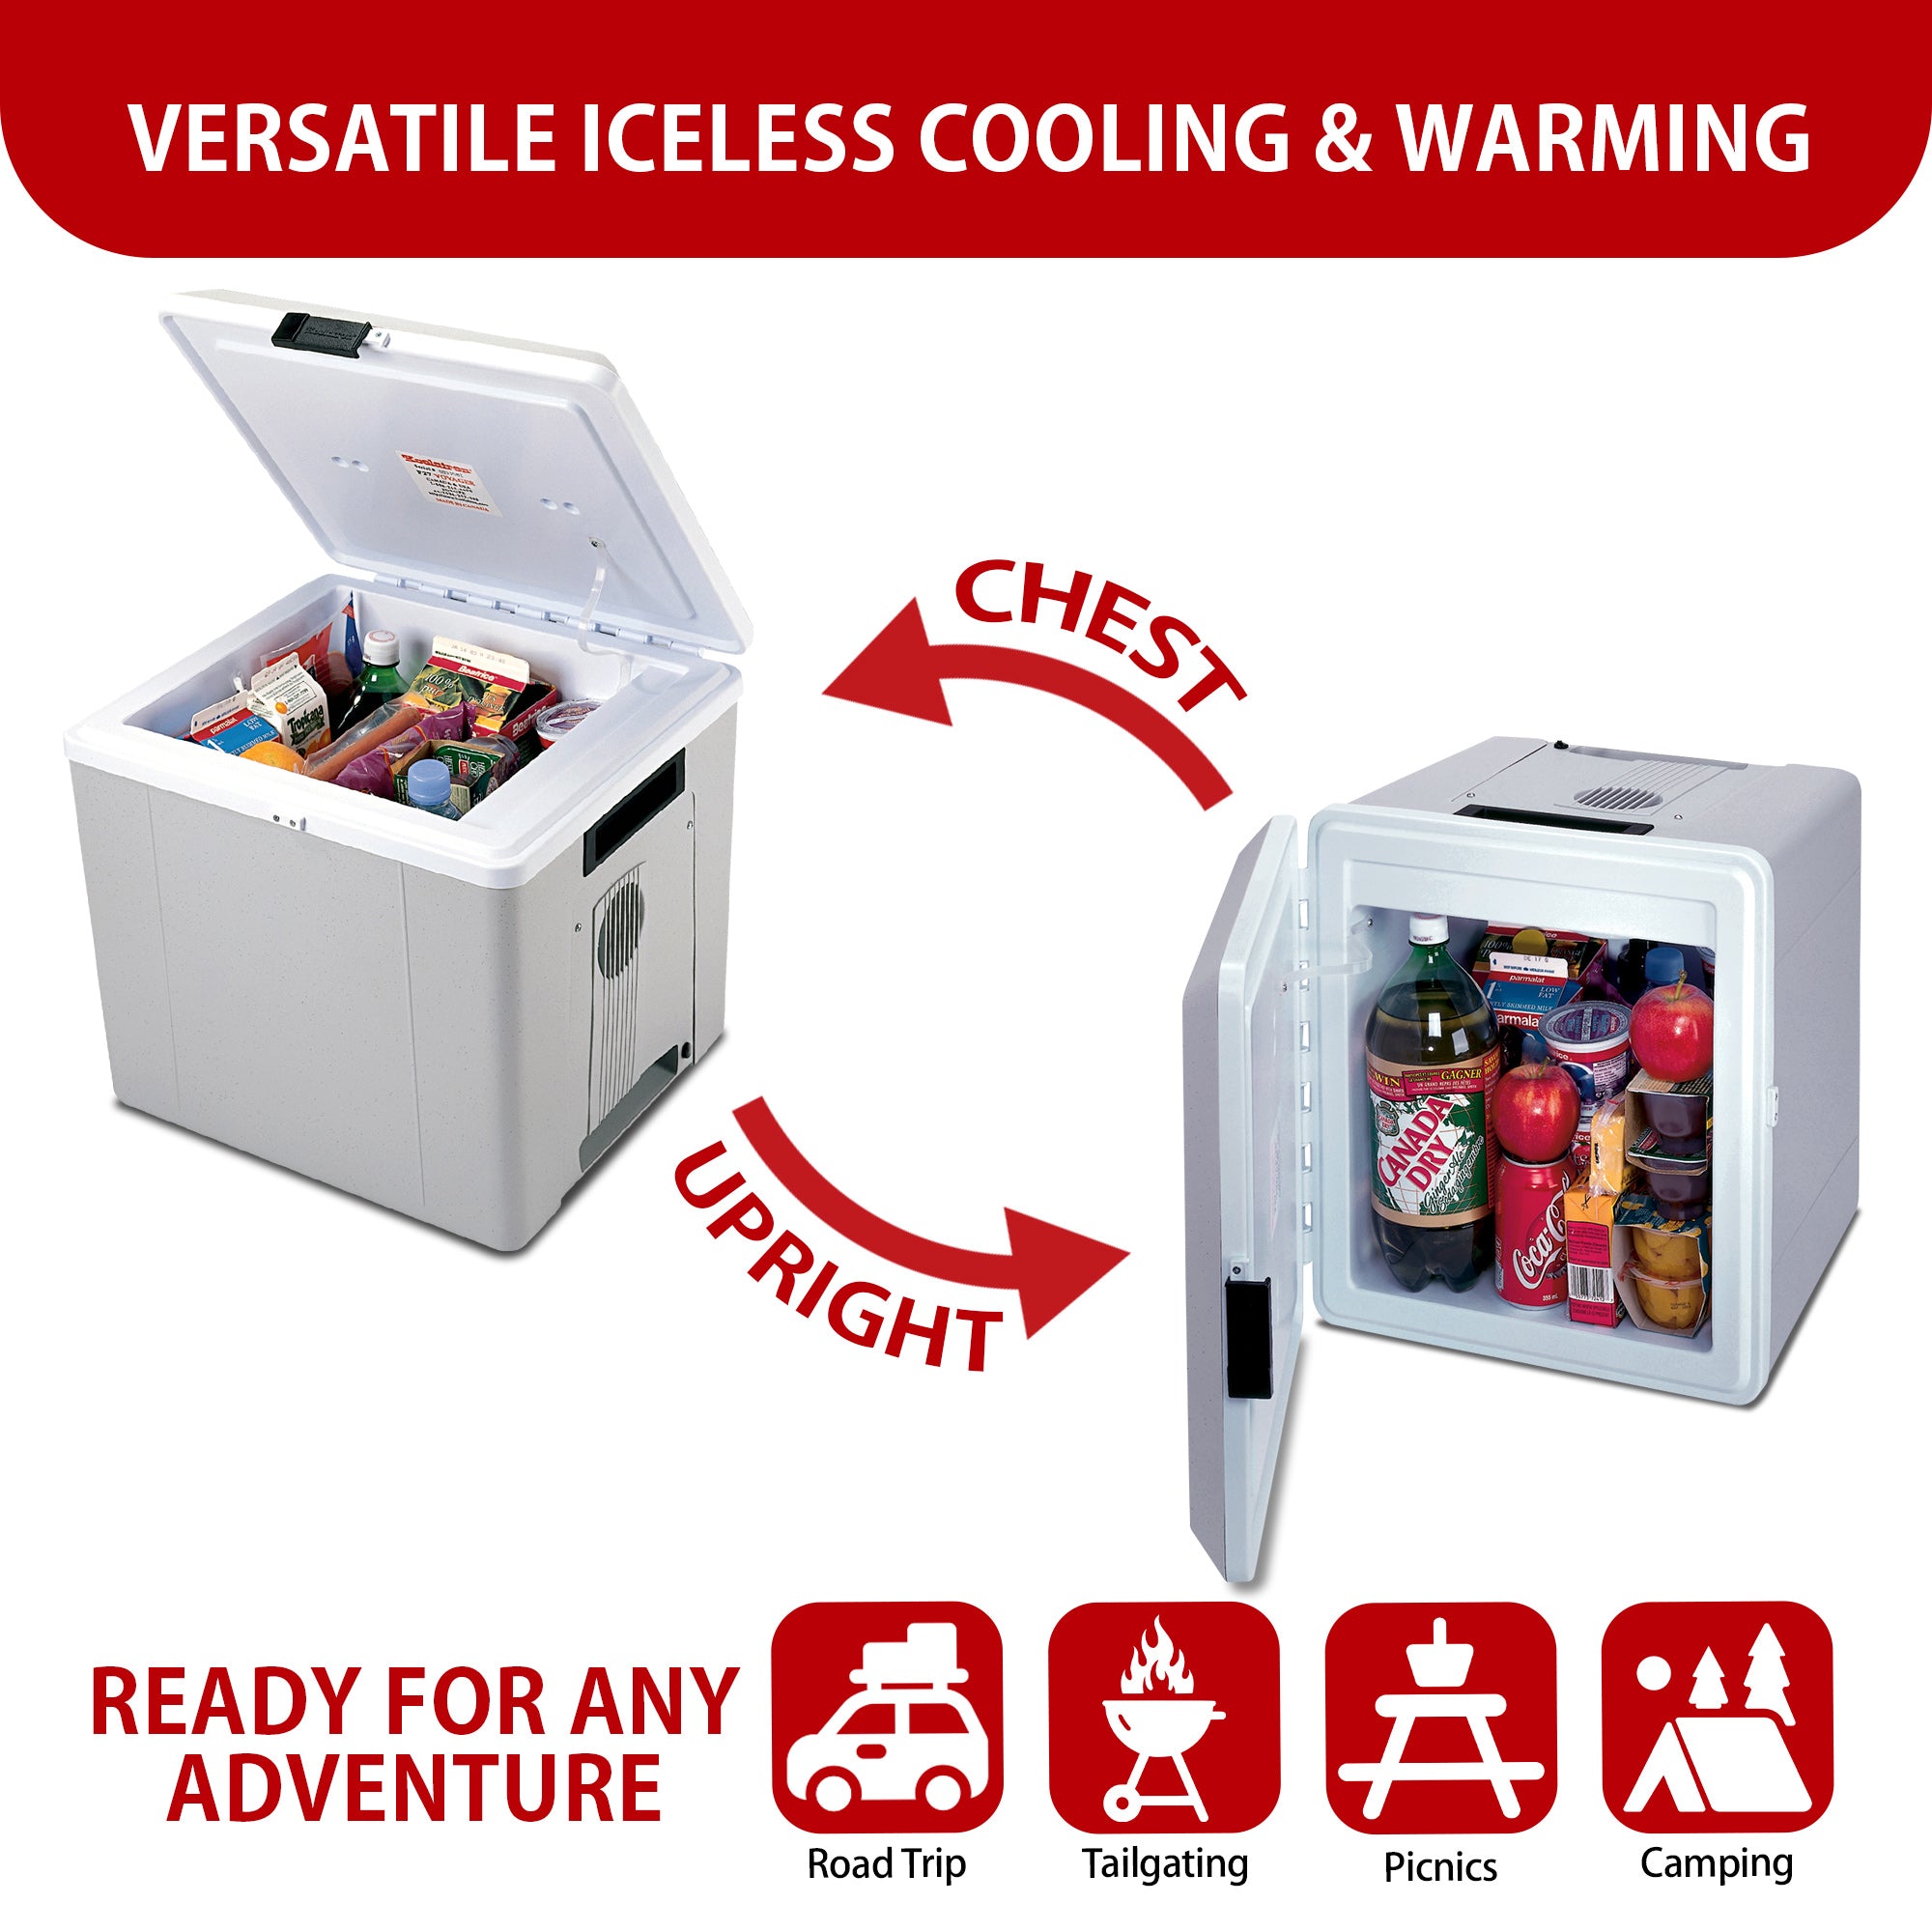 Two images show the Koolatron 12V cooler/warmer as an ice chest and on its side as a mini-fridge with arrows labeled, "CHEST" and "UPRIGHT." Text above reads, "VERSATILE ICELESS COOLING & WARMING." Text below reads, "READY FOR ANY ADVENTURE" followed by icons labeled: Road trip, tailgating, picnics, and camping.